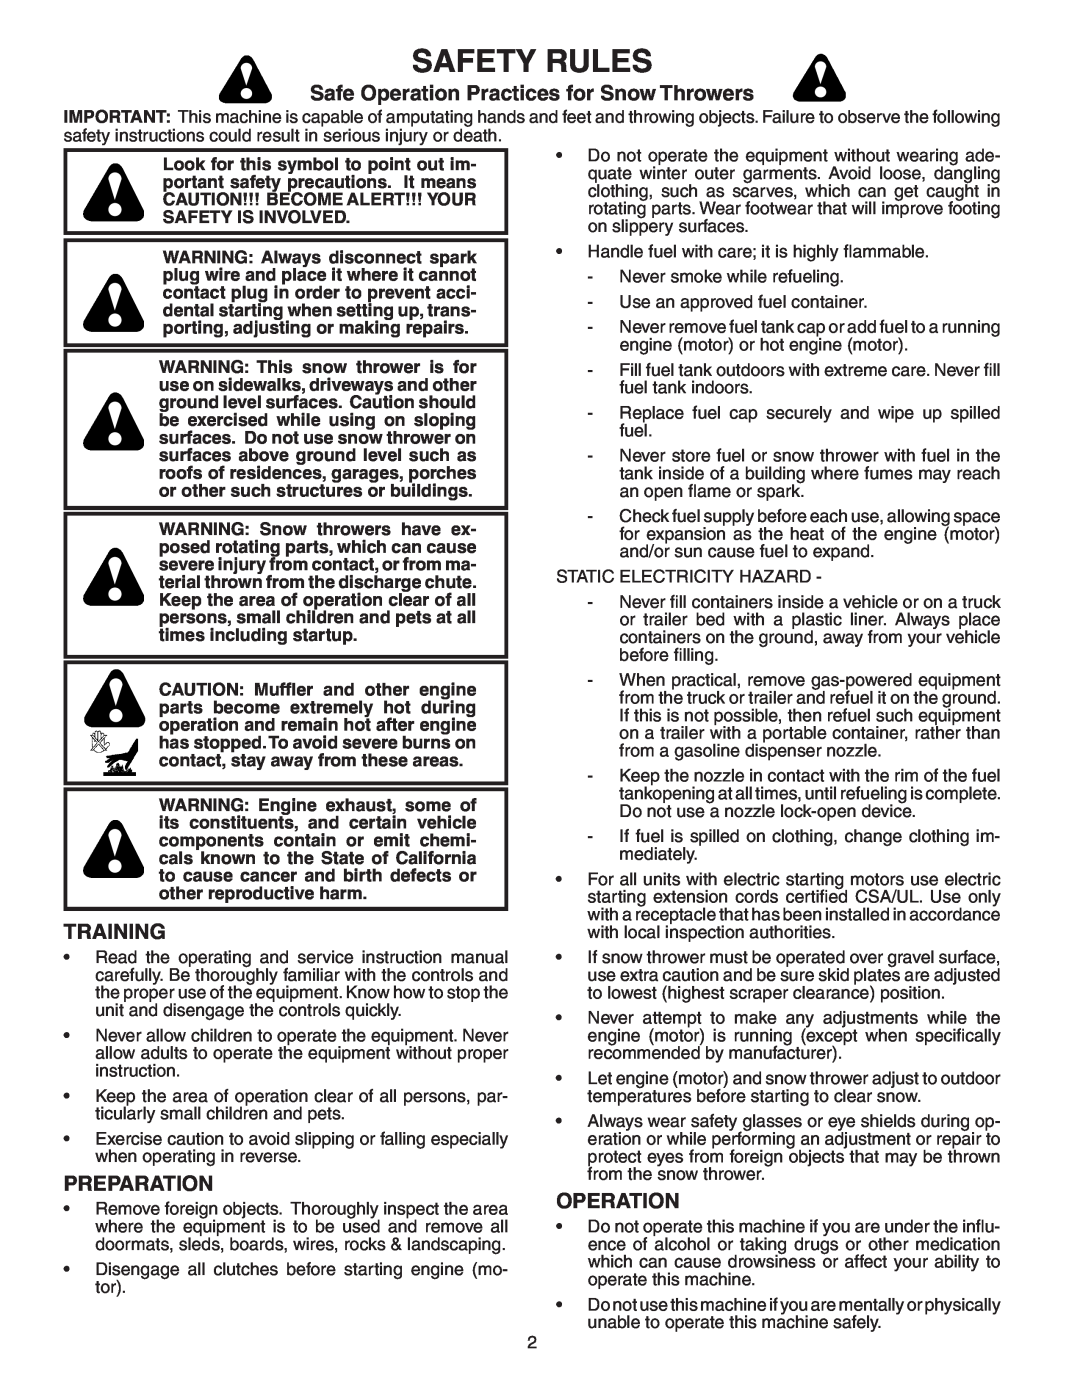 Poulan PP1130ESA owner manual Safety Rules, Safe Operation Practices for Snow Throwers, Training, Preparation 